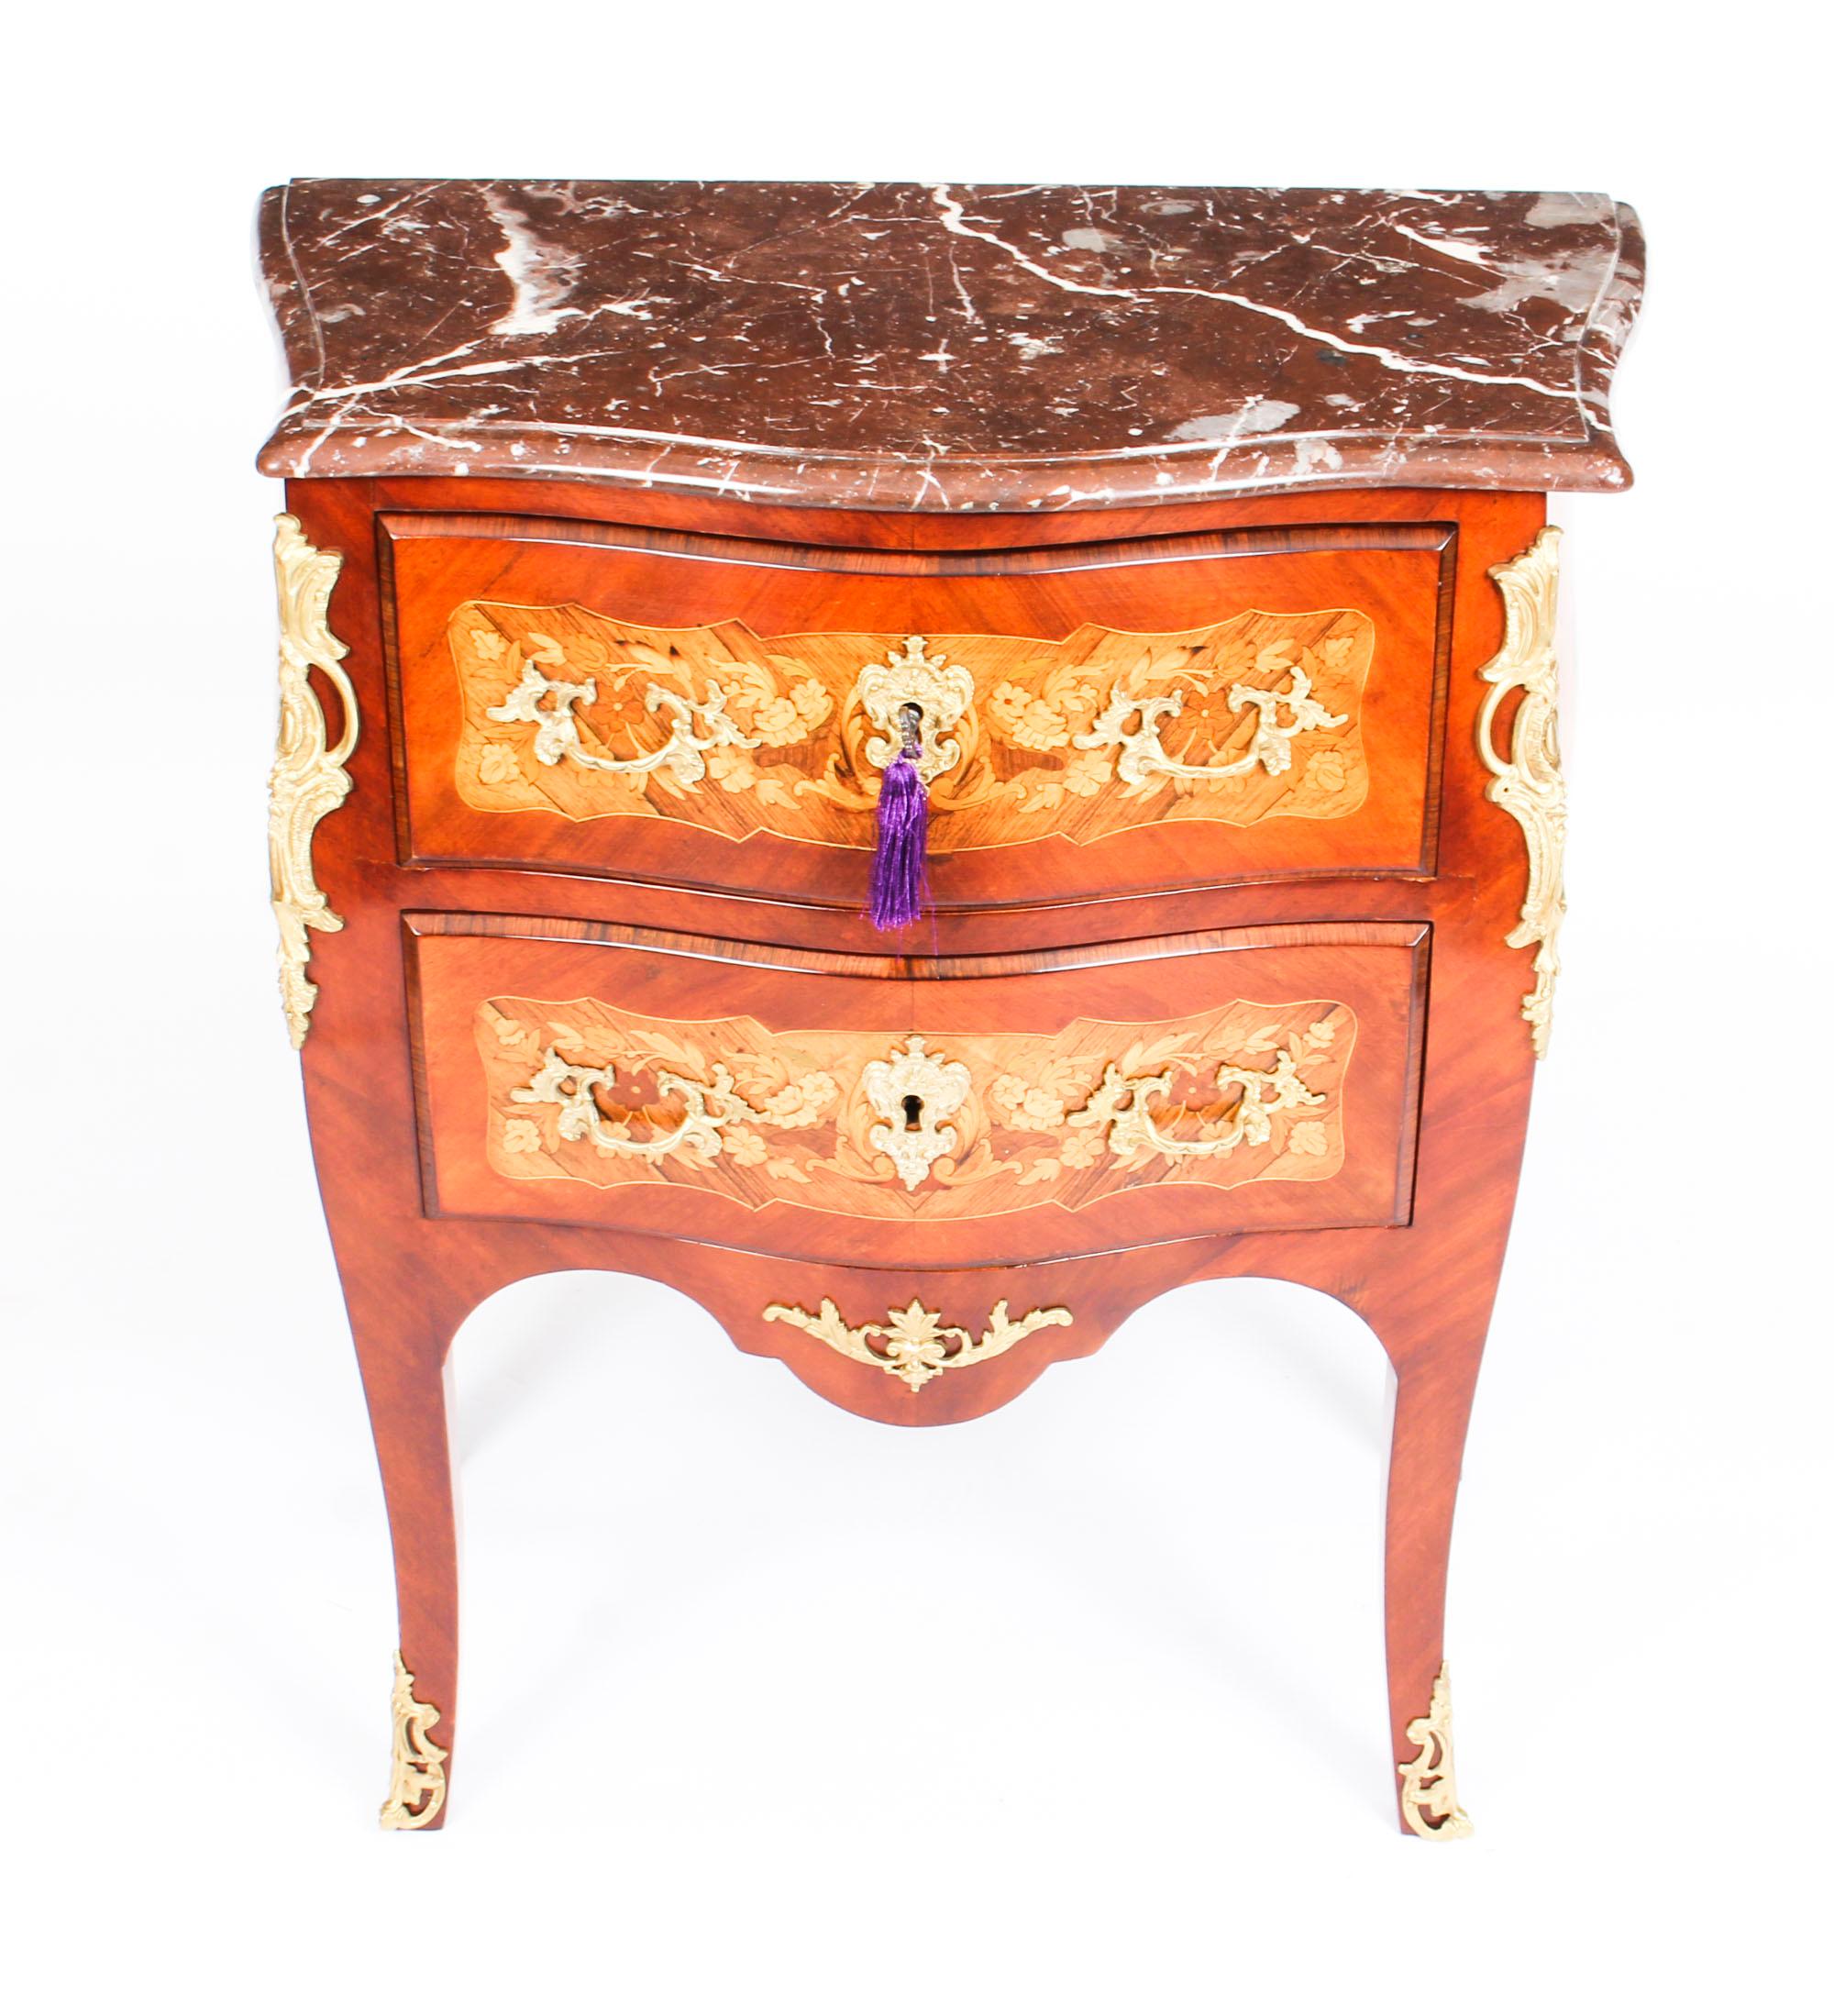 This is a gorgeous pair of antique Kingwood bombe' commodes with beautiful marquetry decoration, dating from the late 19th century.
 
These two-drawer bombe' commodes are crafted from the most beautiful Kingwood, have solid oak lined drawers and